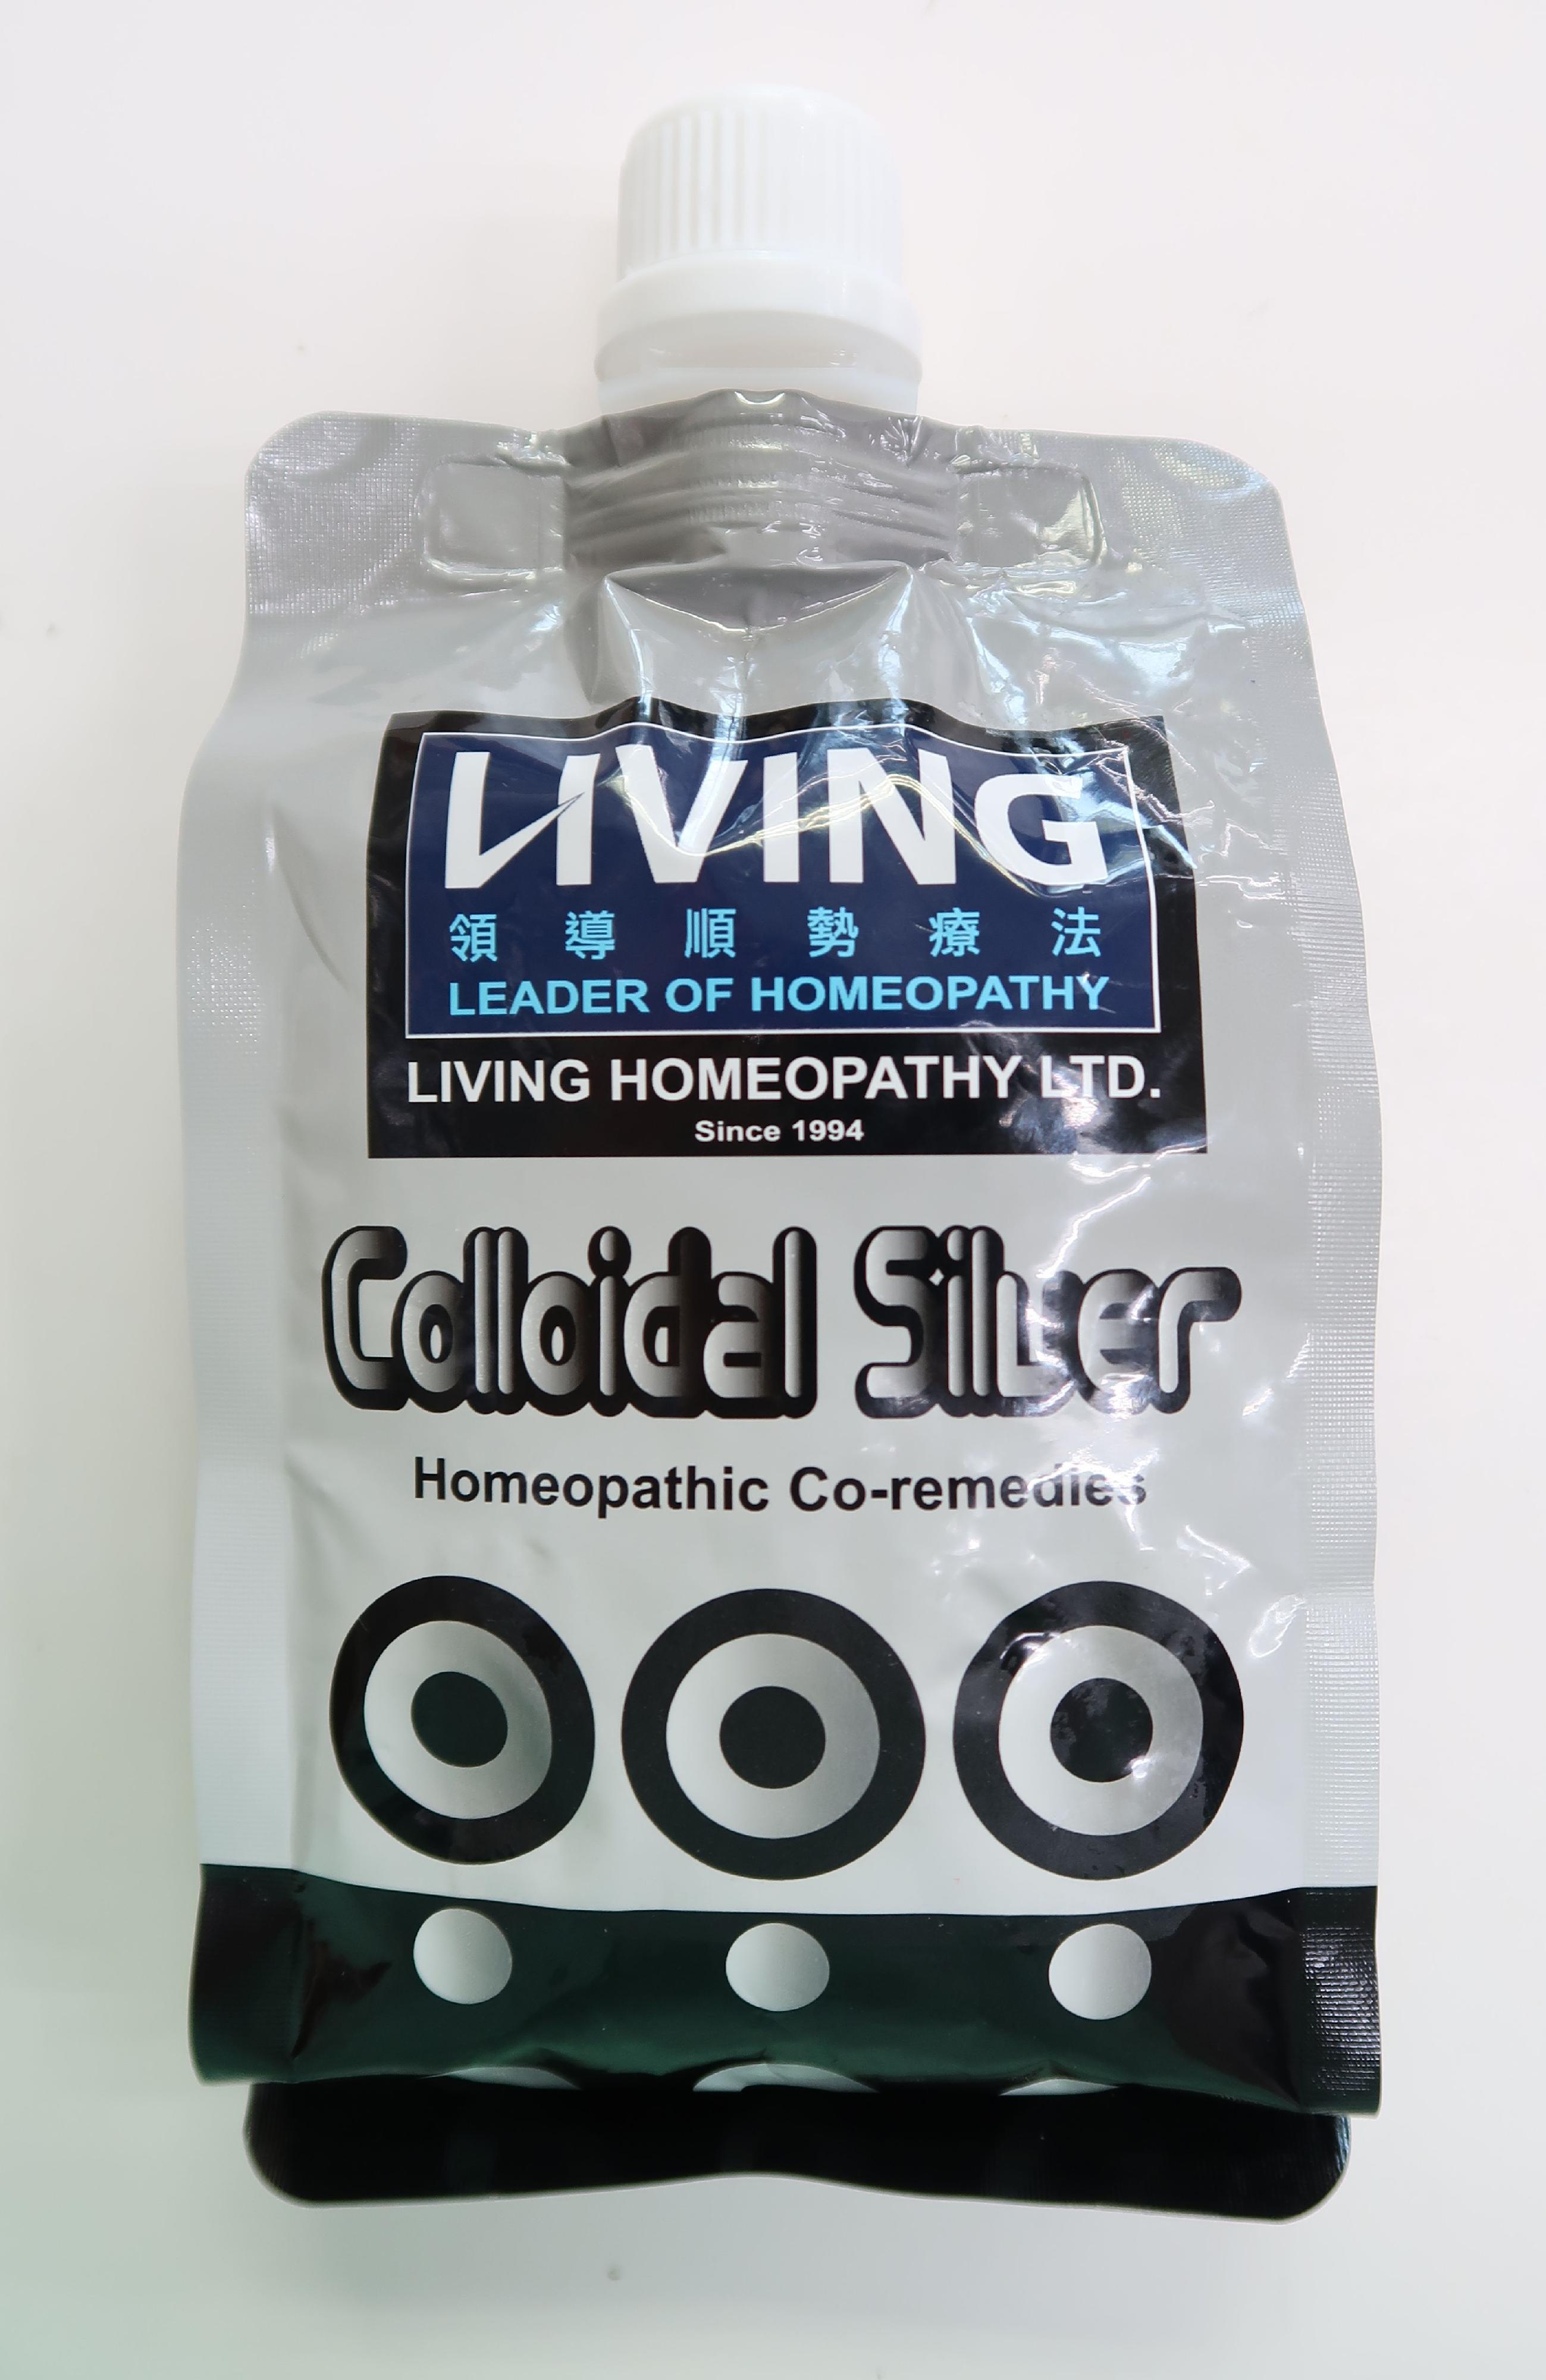 The Department of Health (DH) today (February 27) appealed to members of the public not to buy or consume a product that contains colloidal silver and to seek medical consultation immediately if they feel unwell after consumption, in particular if discolouration of the skin is developed. Photo shows the colloidal silver product involved in a case of silver poisoning.